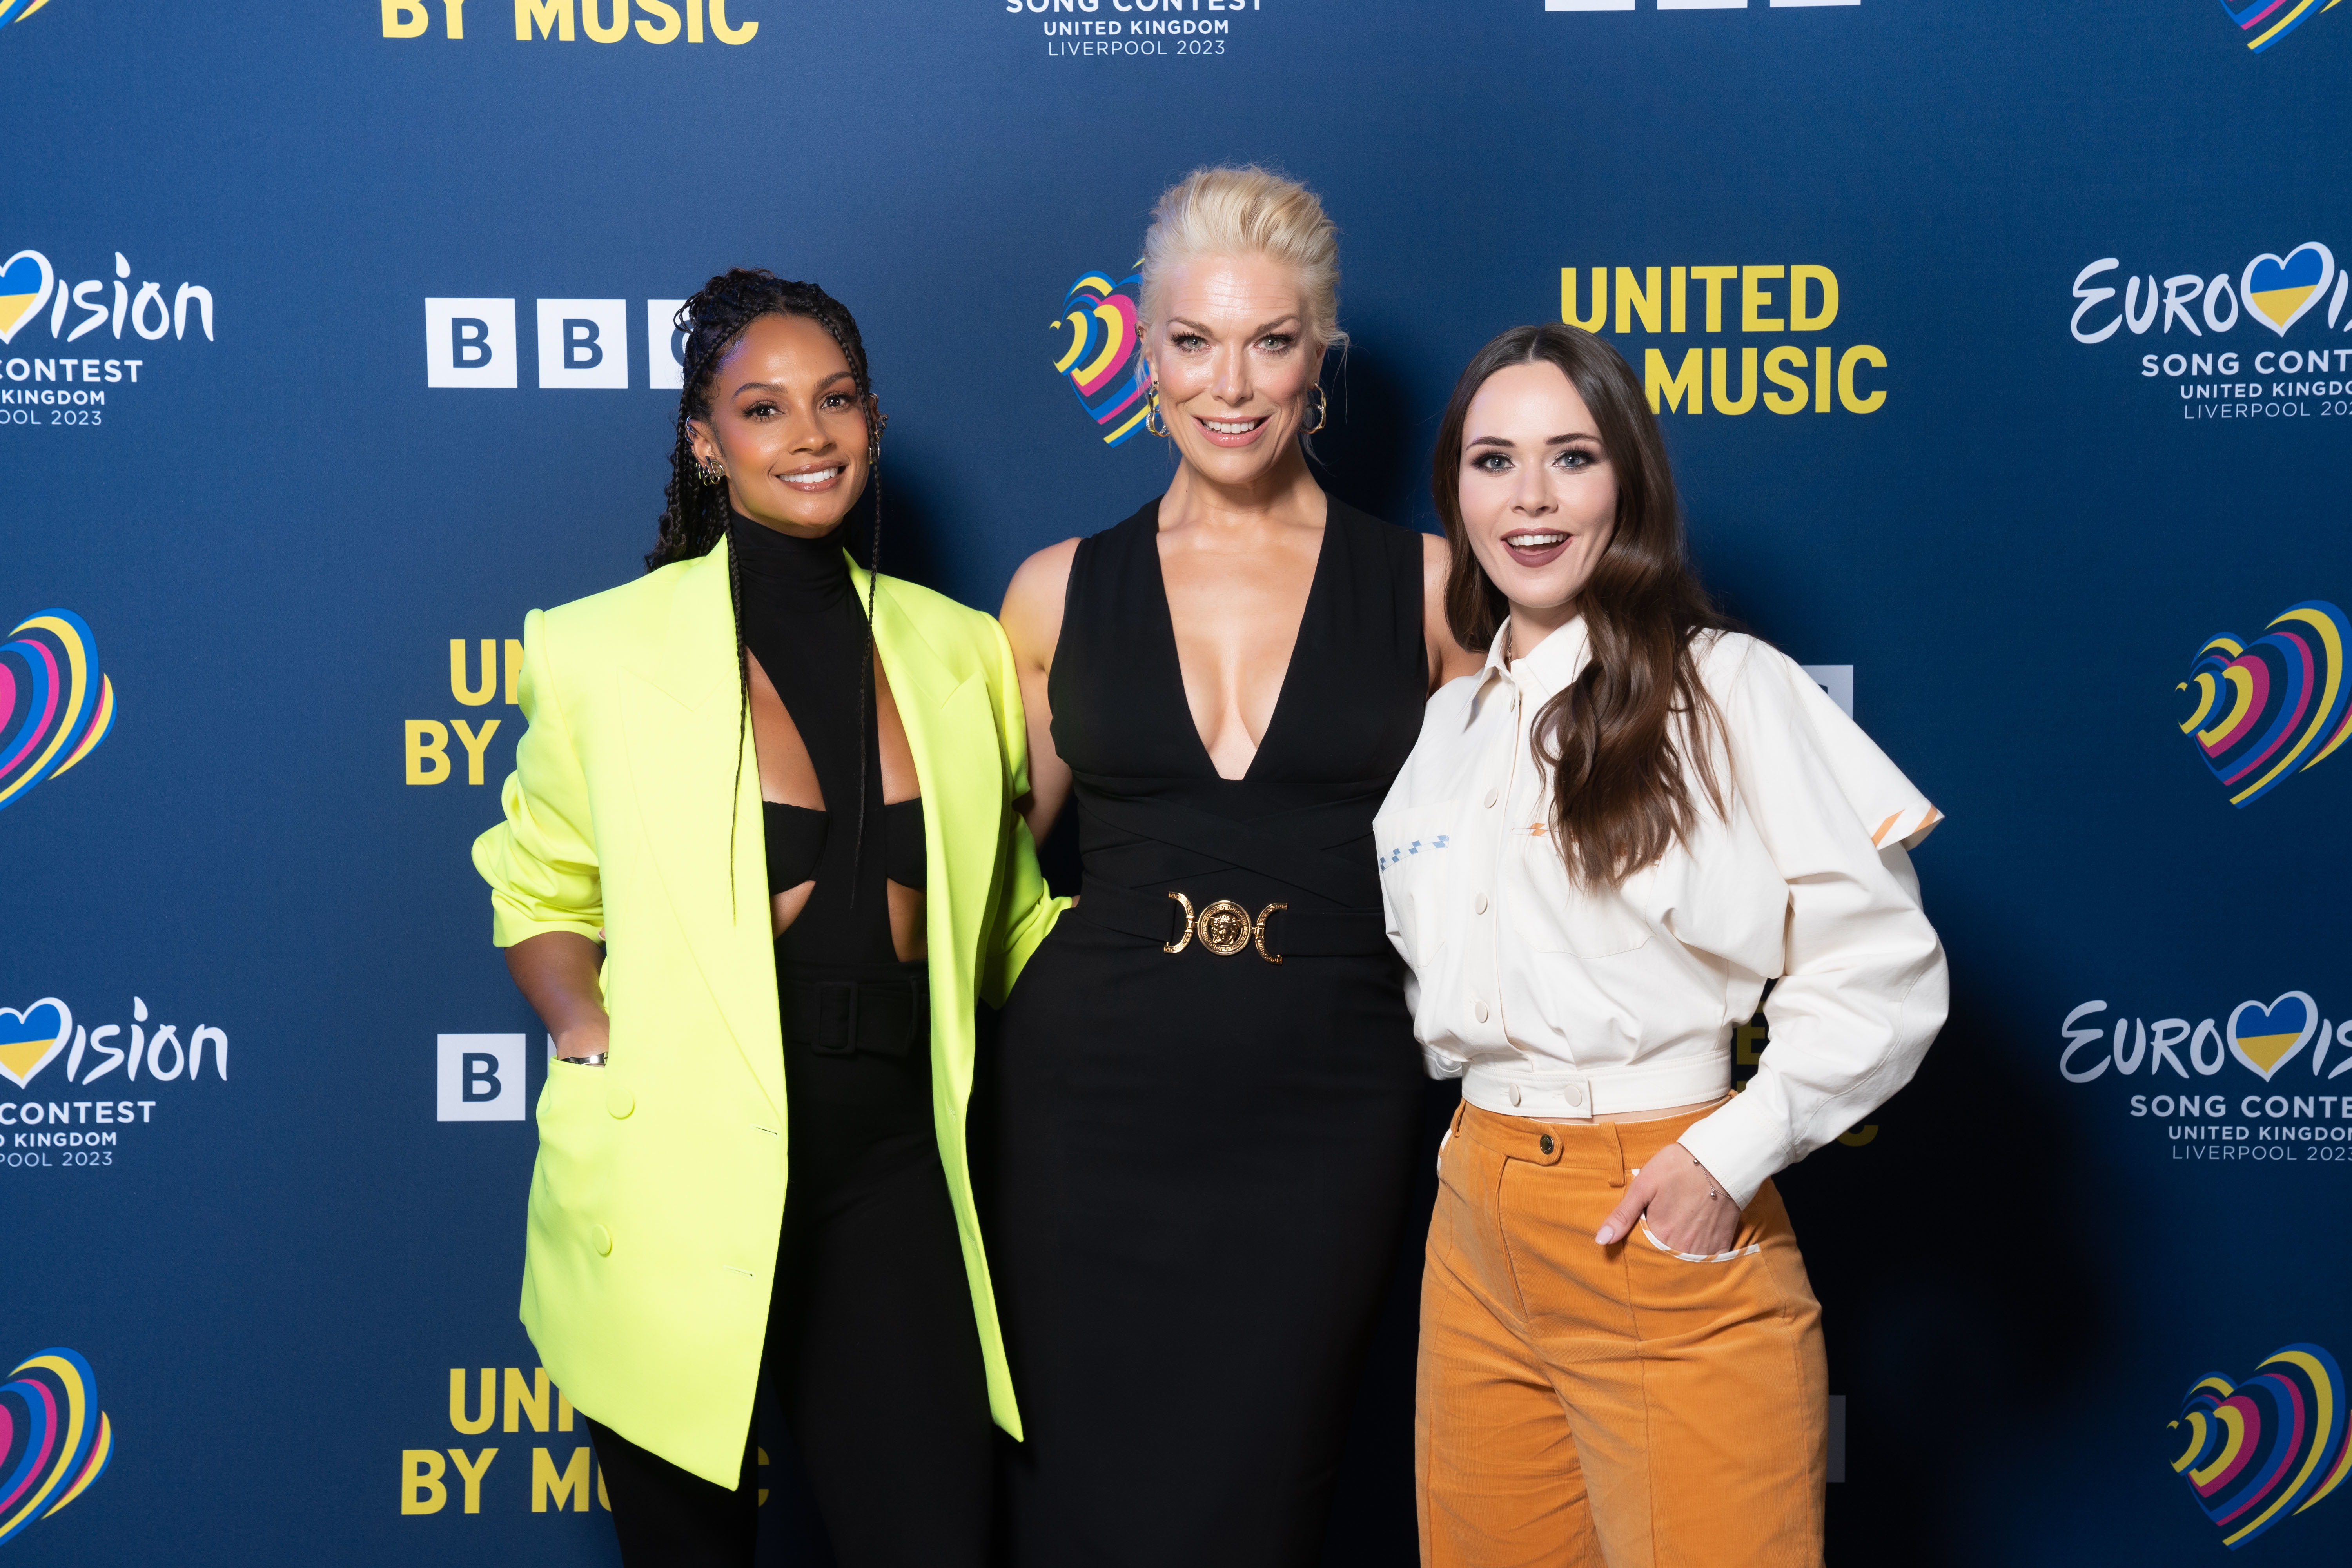 Alesha Dixon, Hannah Waddingham and Julia Sanina posing together at the BBC's official Eurovision Song Contest launch in Liverpool, standing in front of a display board  that shows the BBC logo, the Eurovision Song Contest logo, and the slogan 'United by music'